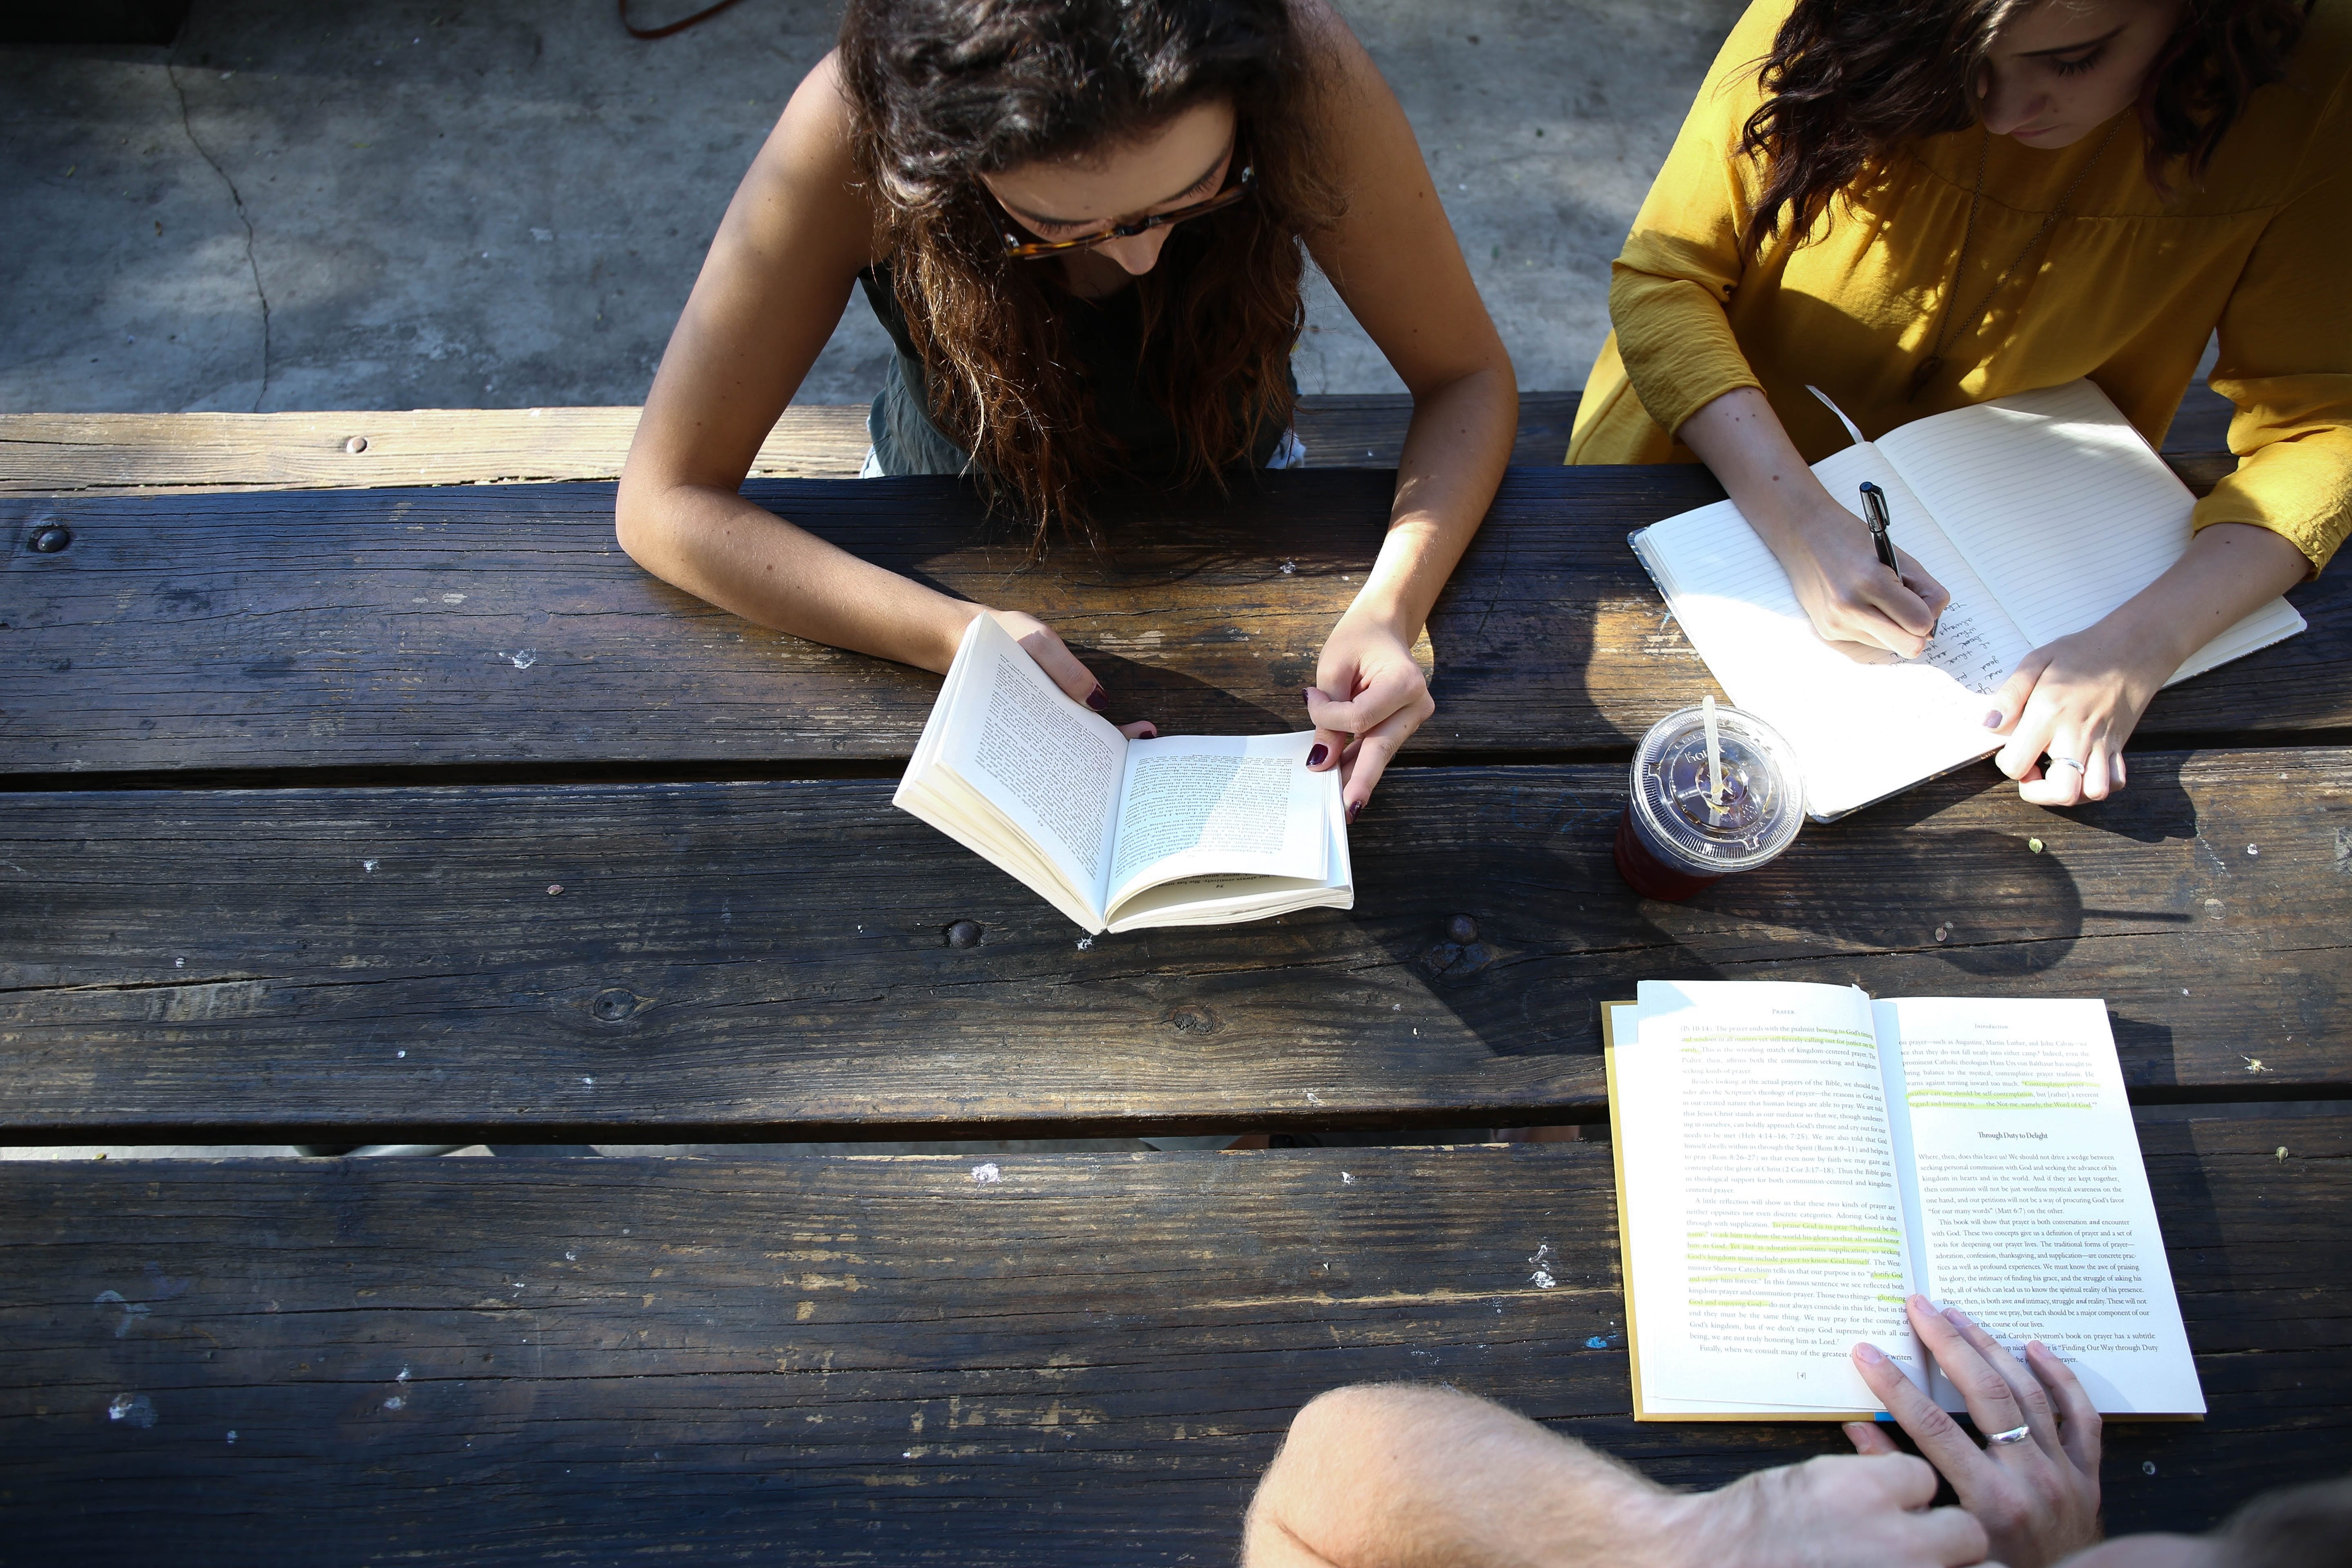 Three people studying at an outdoor table; image by Alexis Brown, via Unsplash.com.